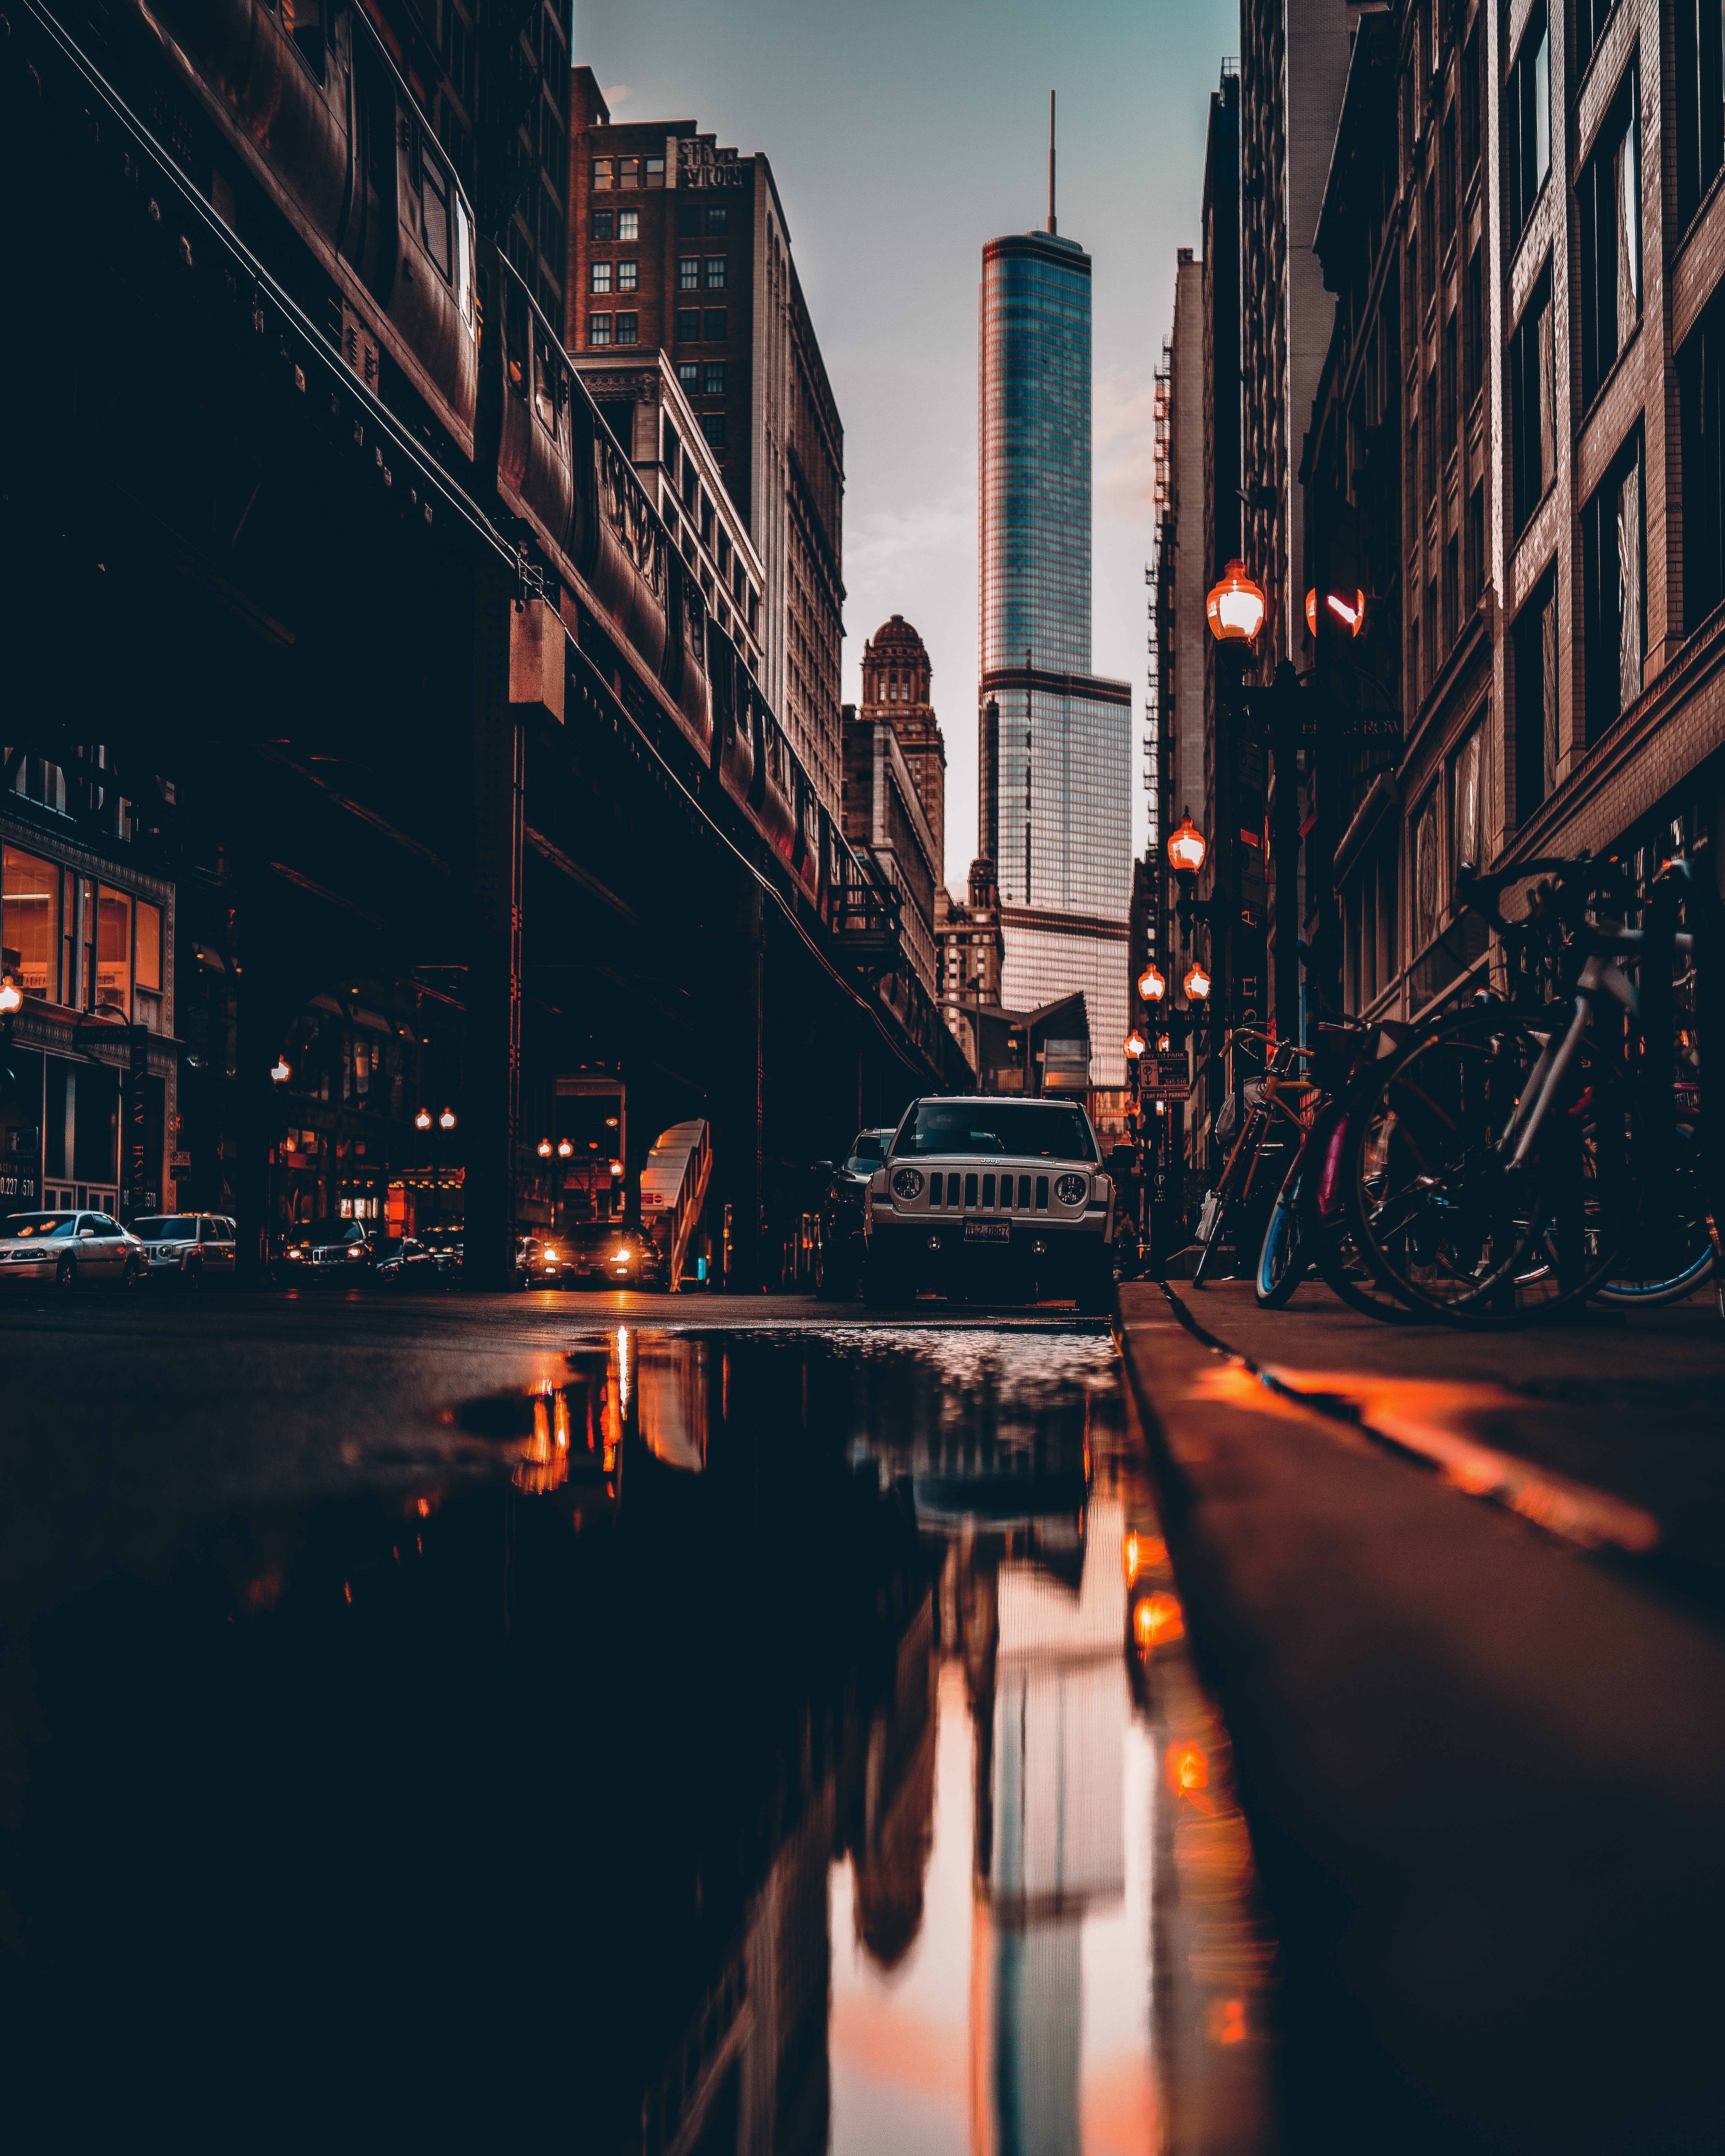 78030 download wallpaper street, cities, auto, bicycles, city, building, reflection, puddle screensavers and pictures for free